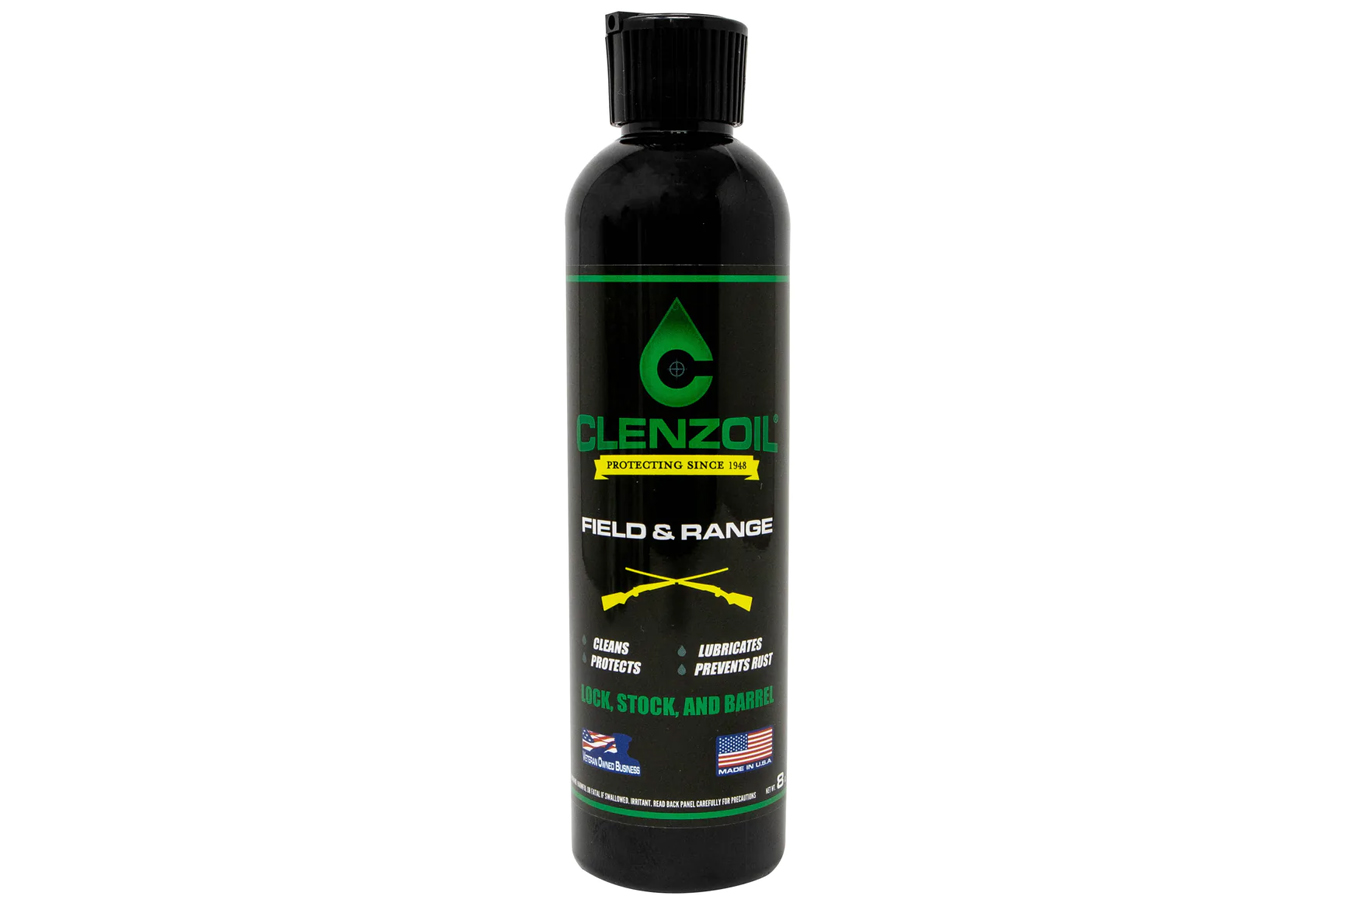 CLENZOIL FIELD AND RANGE SOLUTION 8 OZ